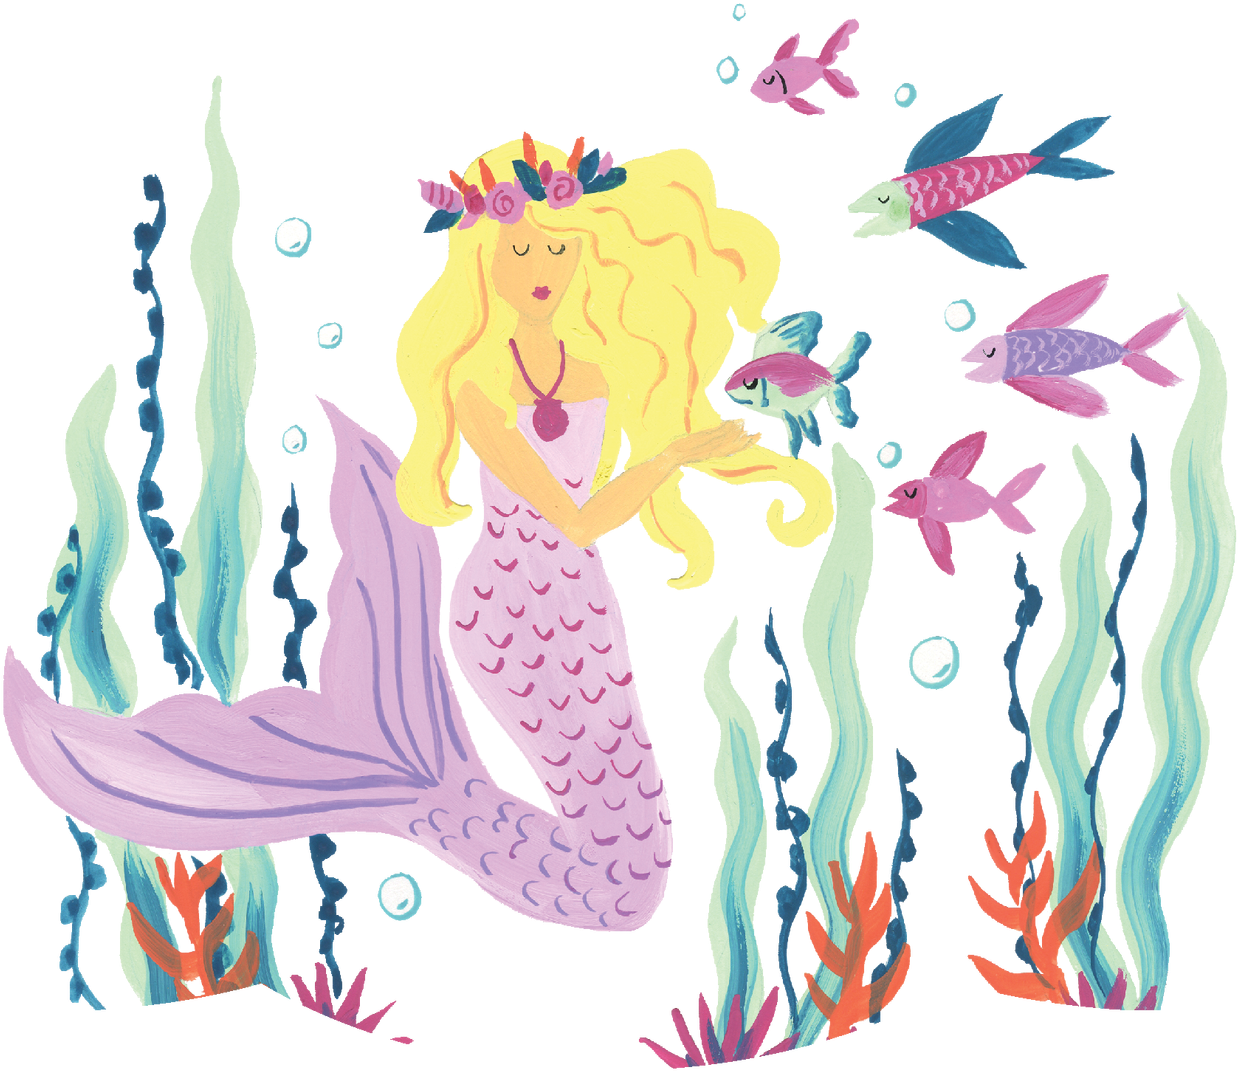 A Mermaid With Fish And Algae